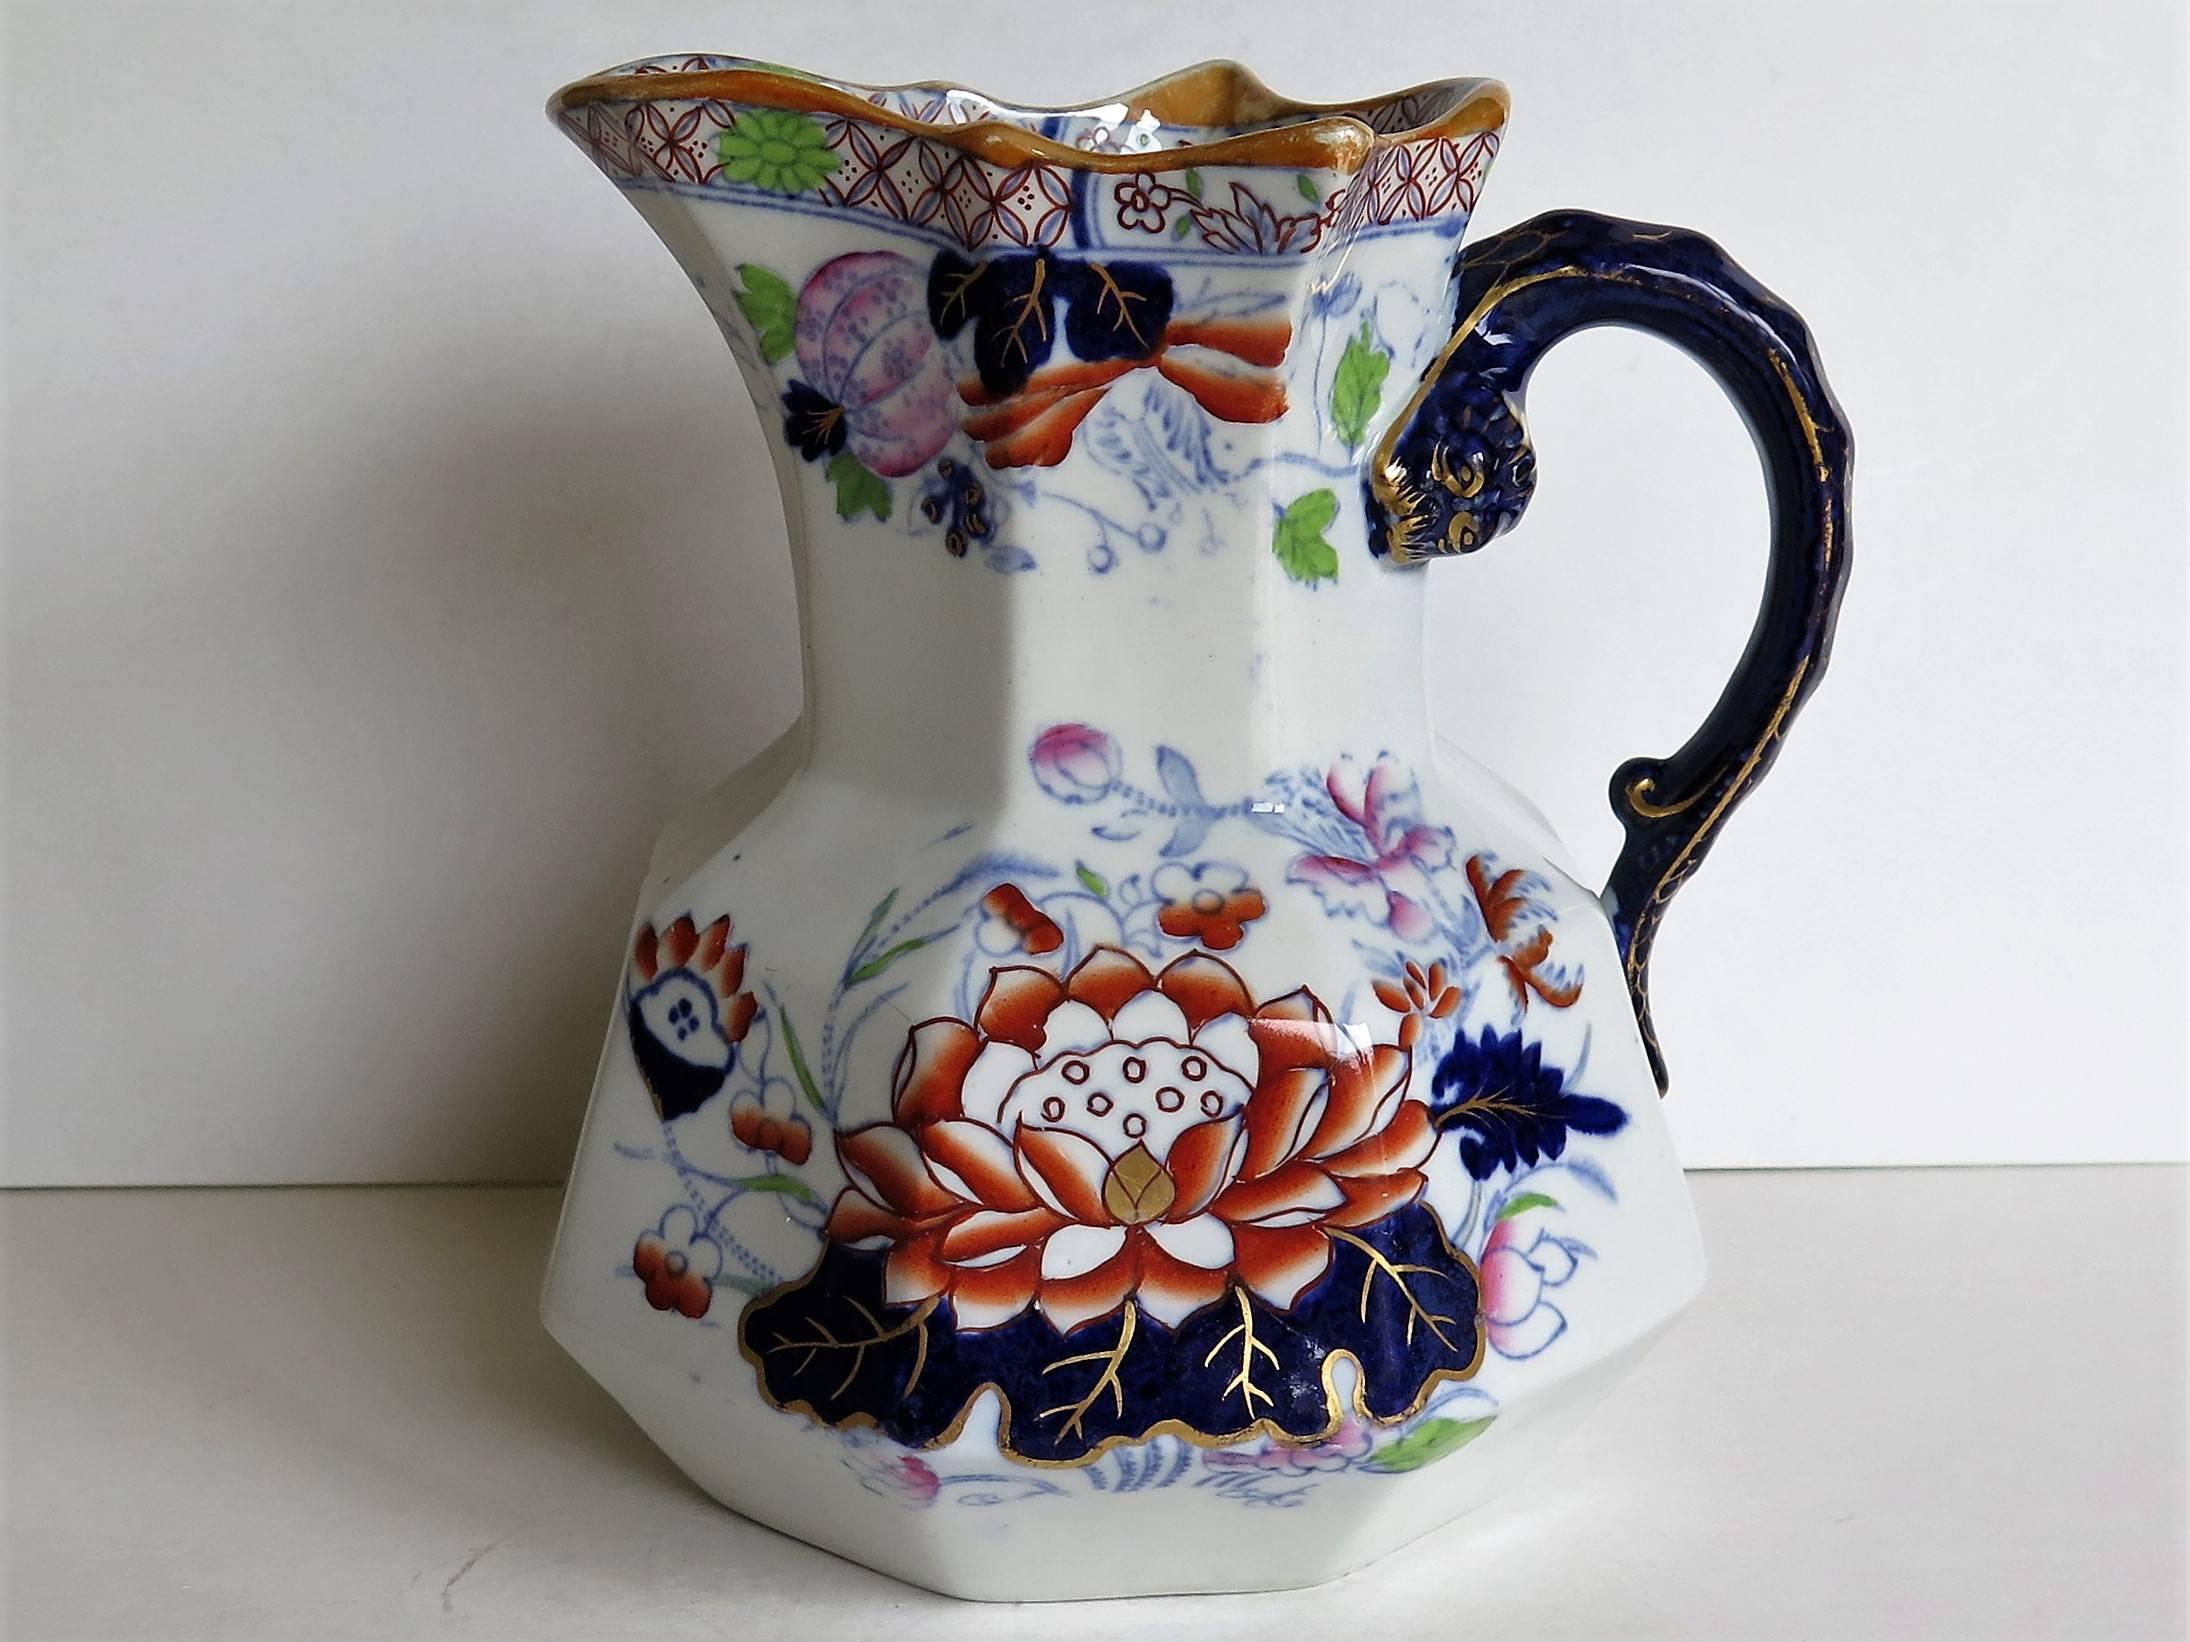 This is a very good jug or pitcher by Mason's ironstone, England, circa 1880.

The jug has the Hydra shape with the snake heads handle with lower spur. 

This jug has one of the very decorative and sought after oriental, Chinoiserie patterns